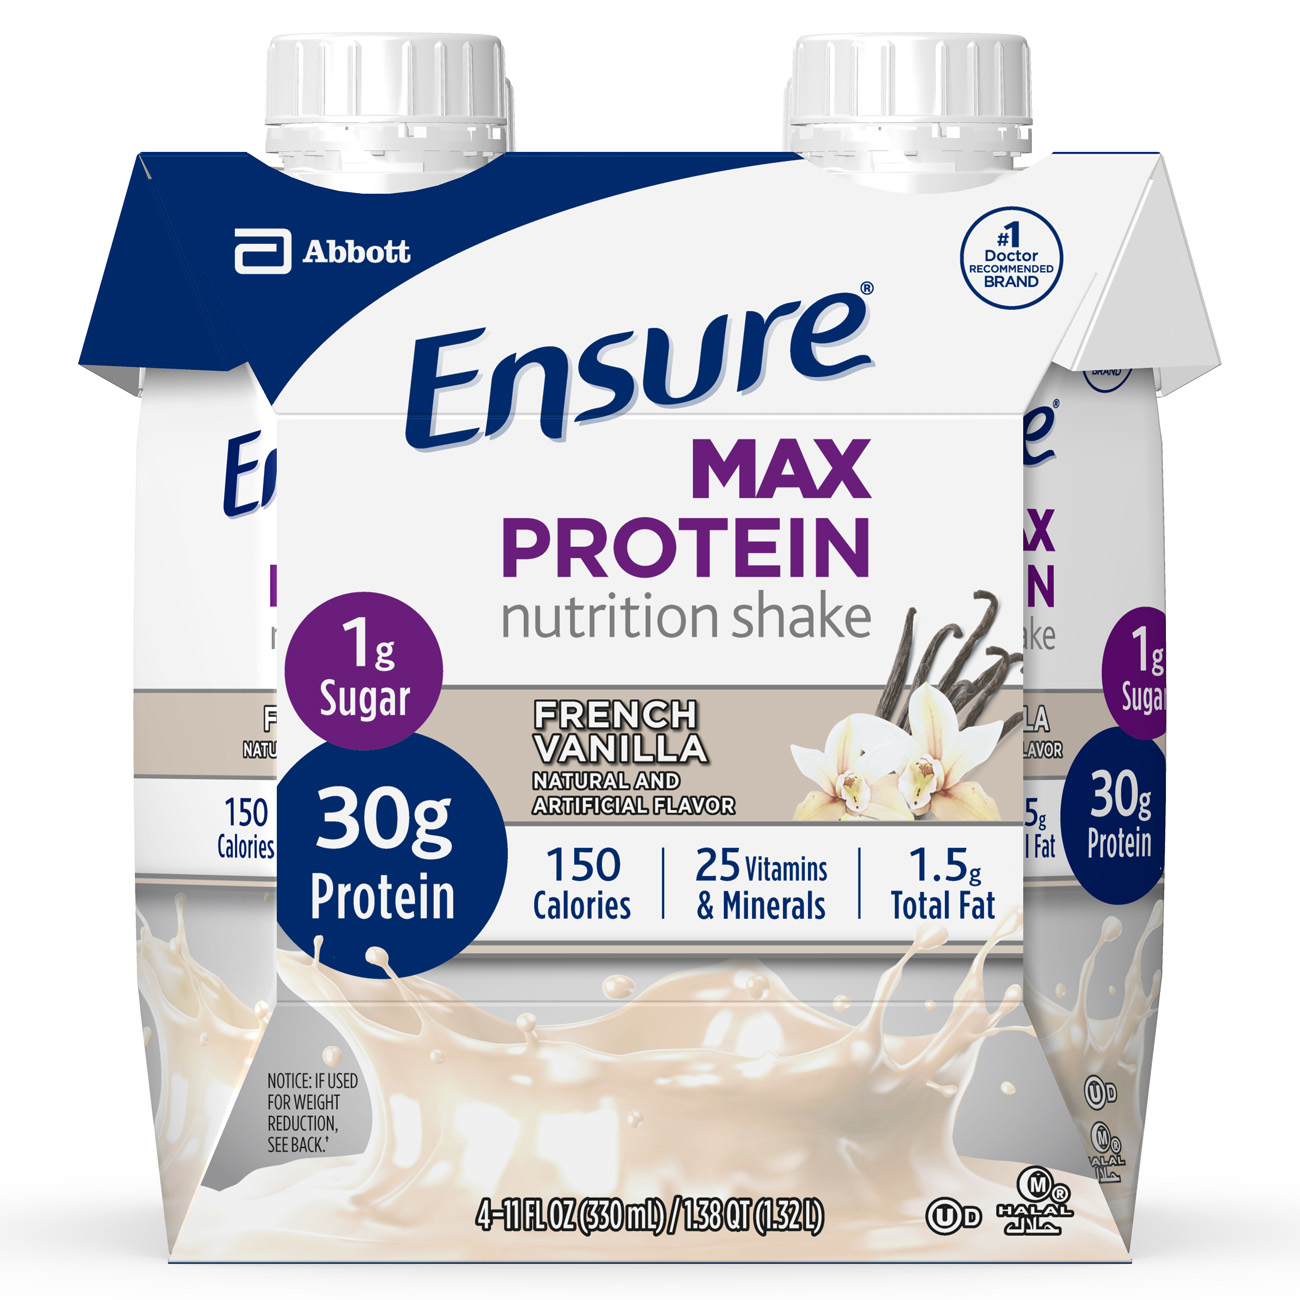 Ensure Max Protein Nutrition Shake, French Vanilla, 11 fl oz, 4 Count - image 1 of 15